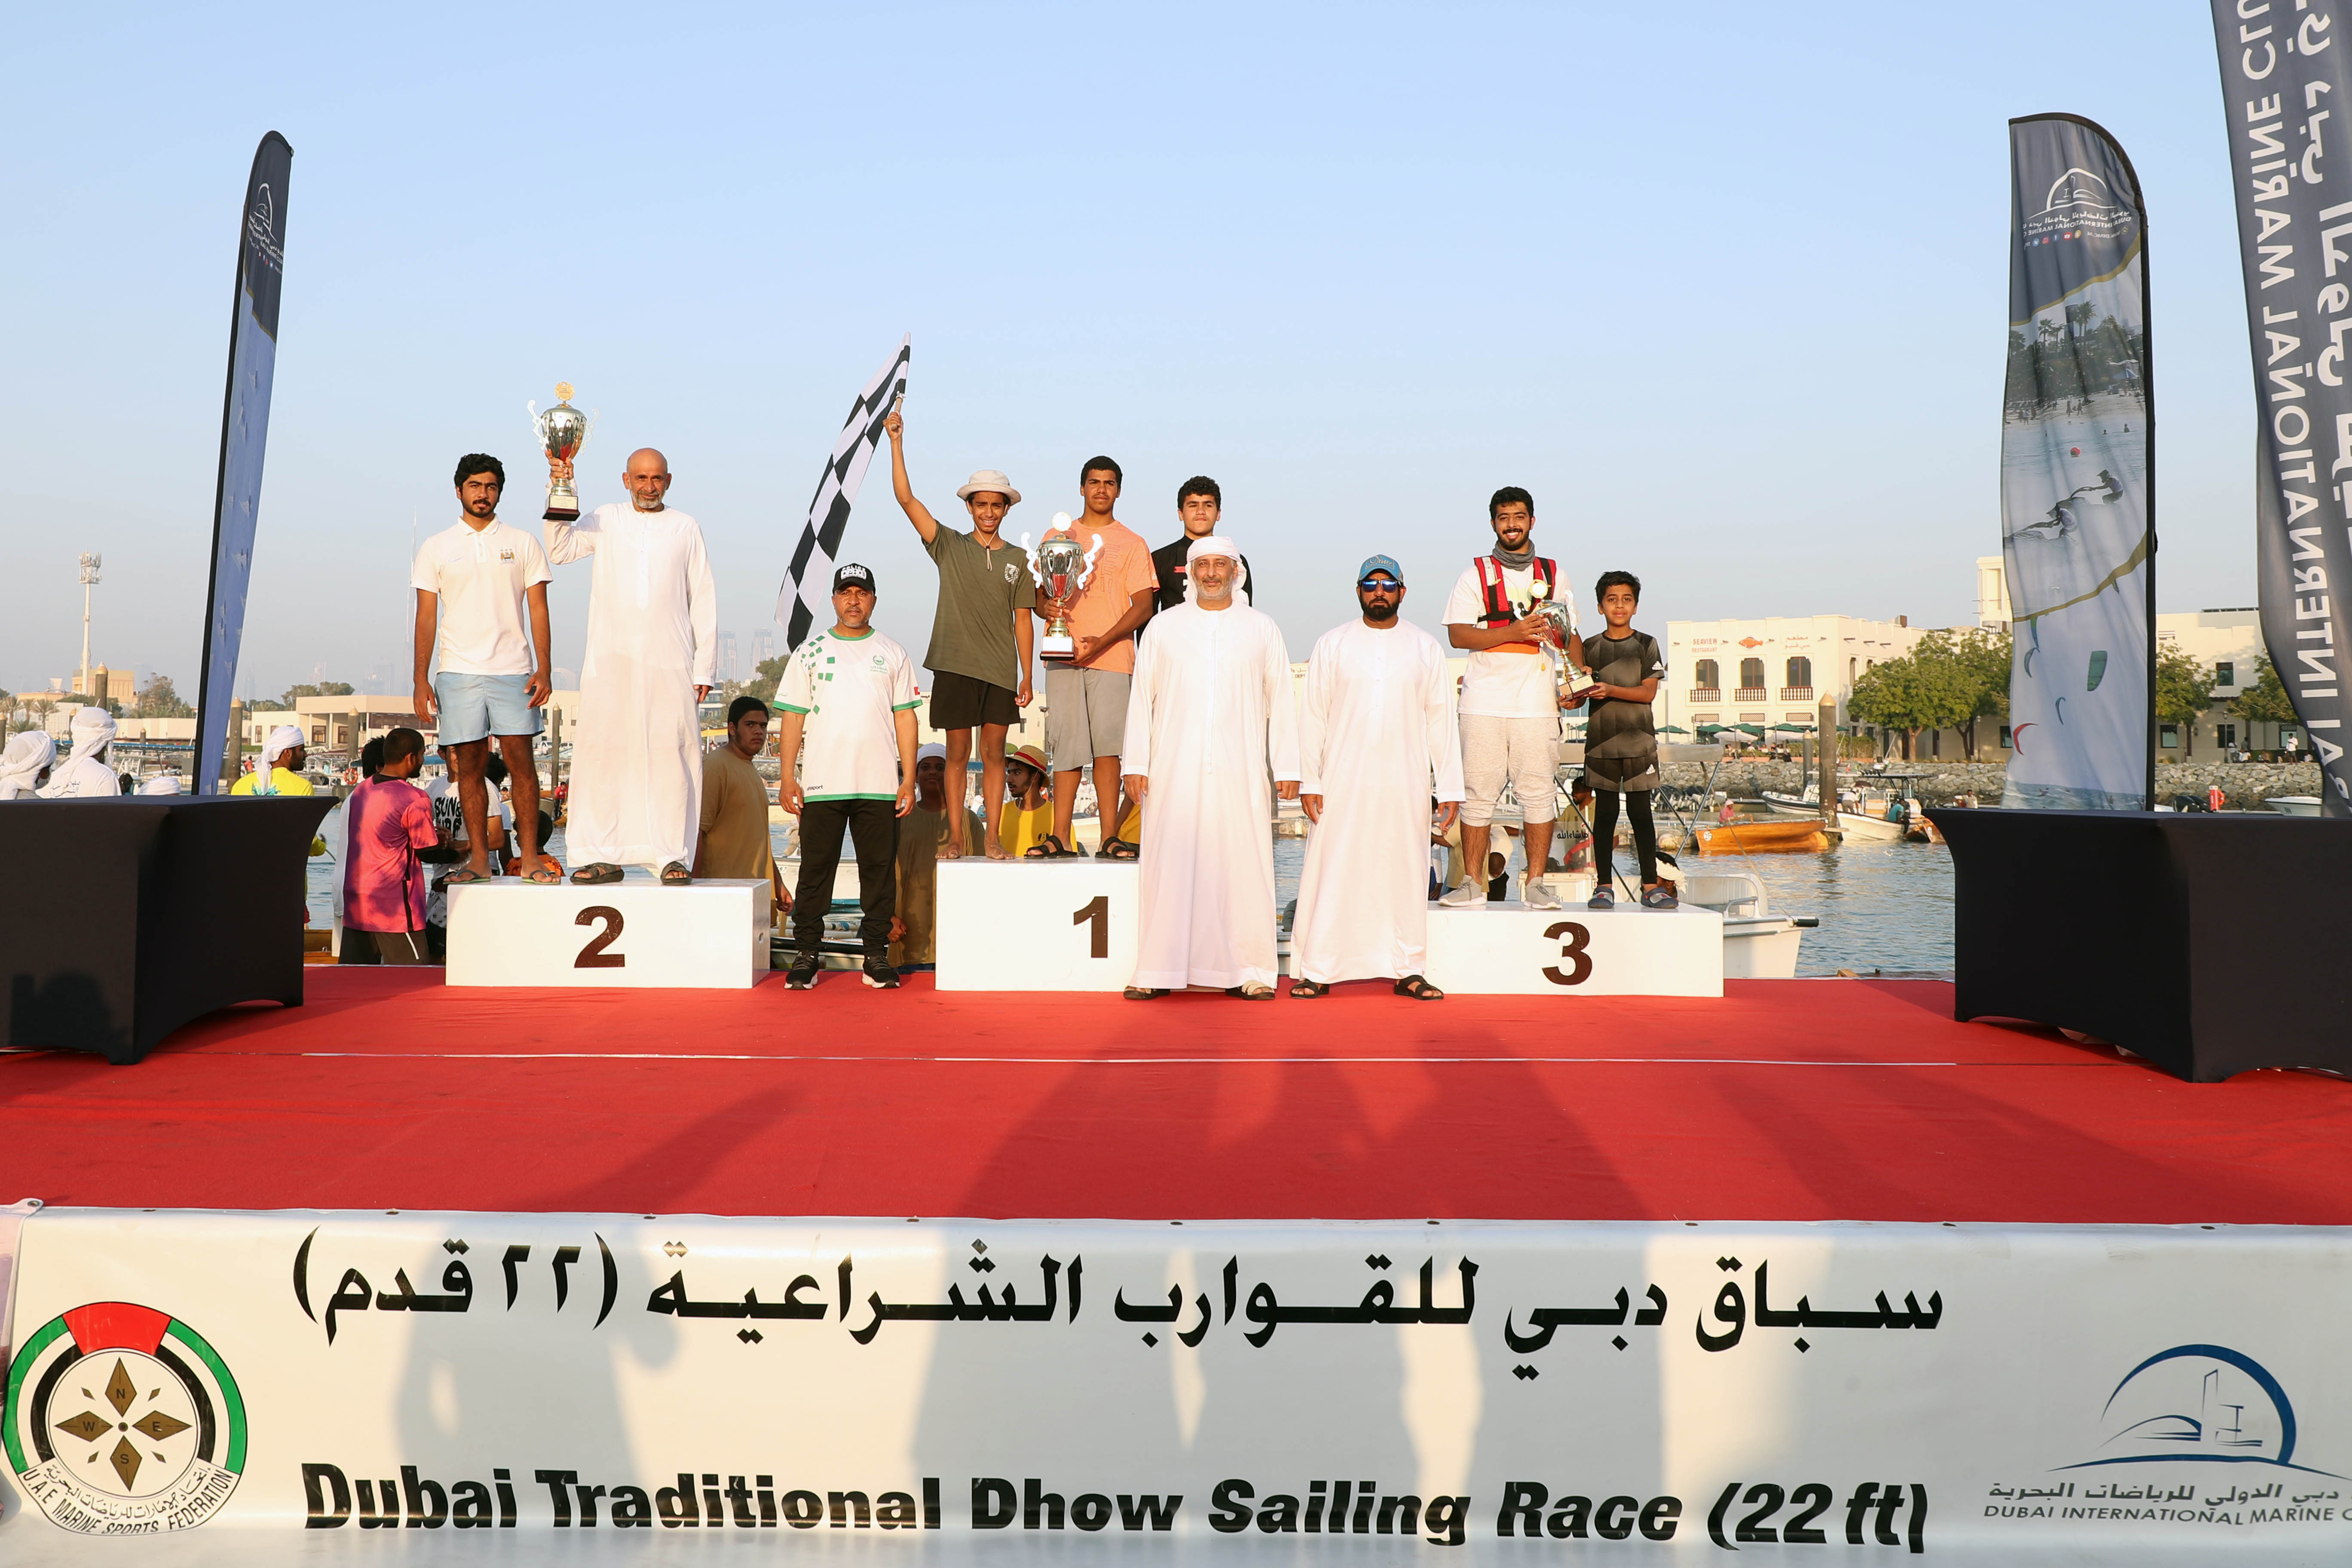 Toofan 21 Topped the 22ft Dhow Sailing Race